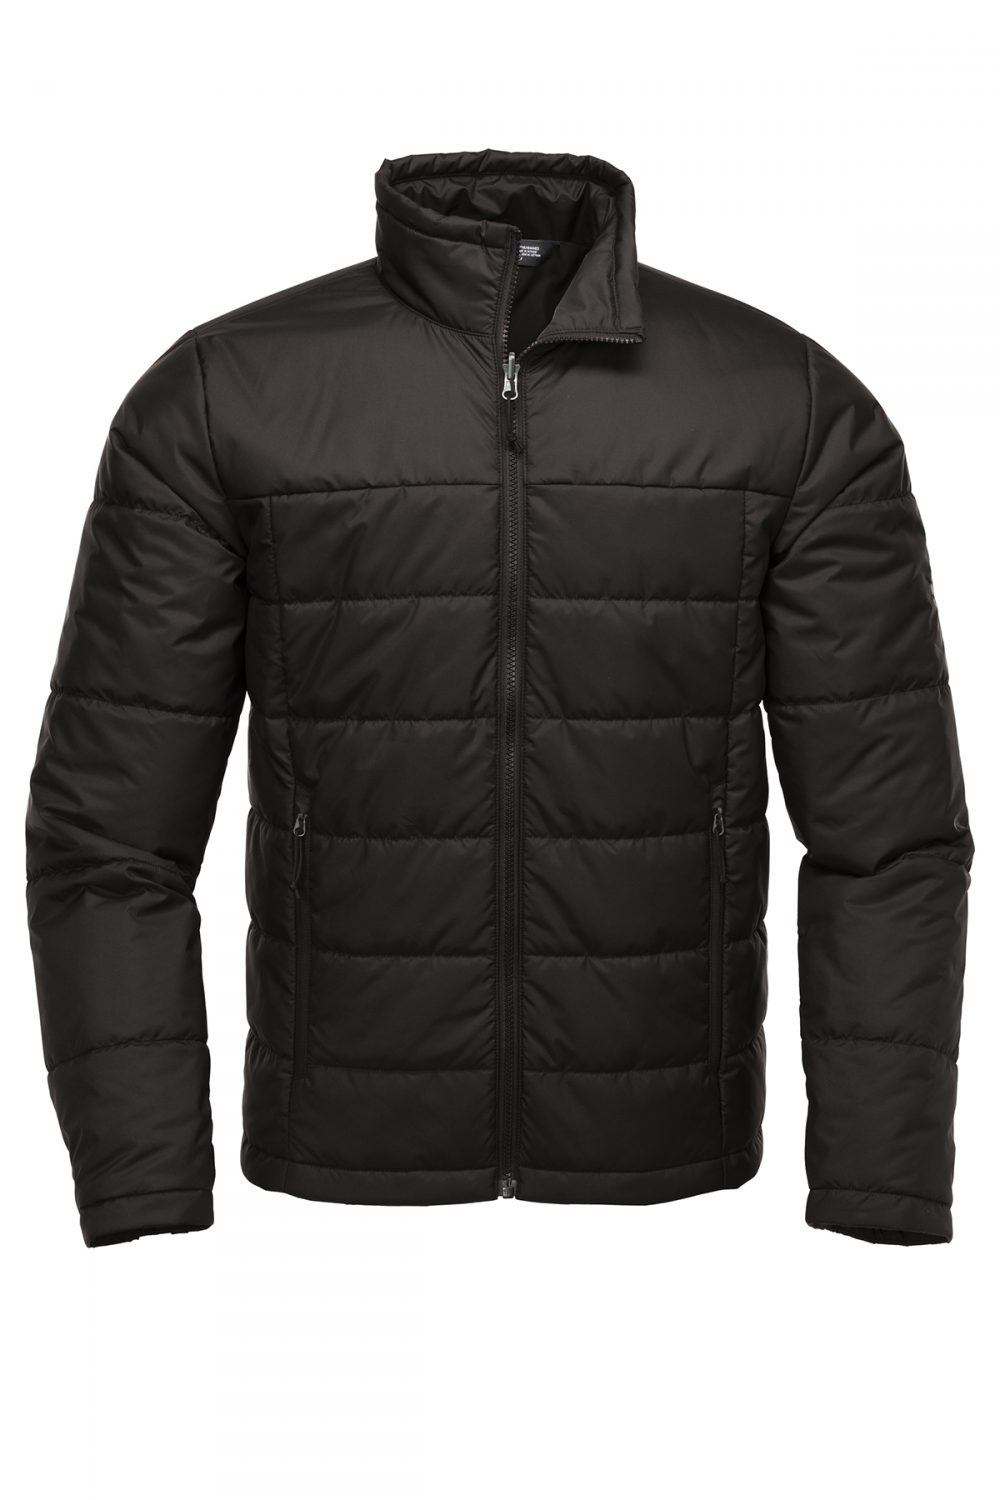 The North Face ® Nf0a3vhr Traverse Triclimate ® 3-in-1 Jacket size M1